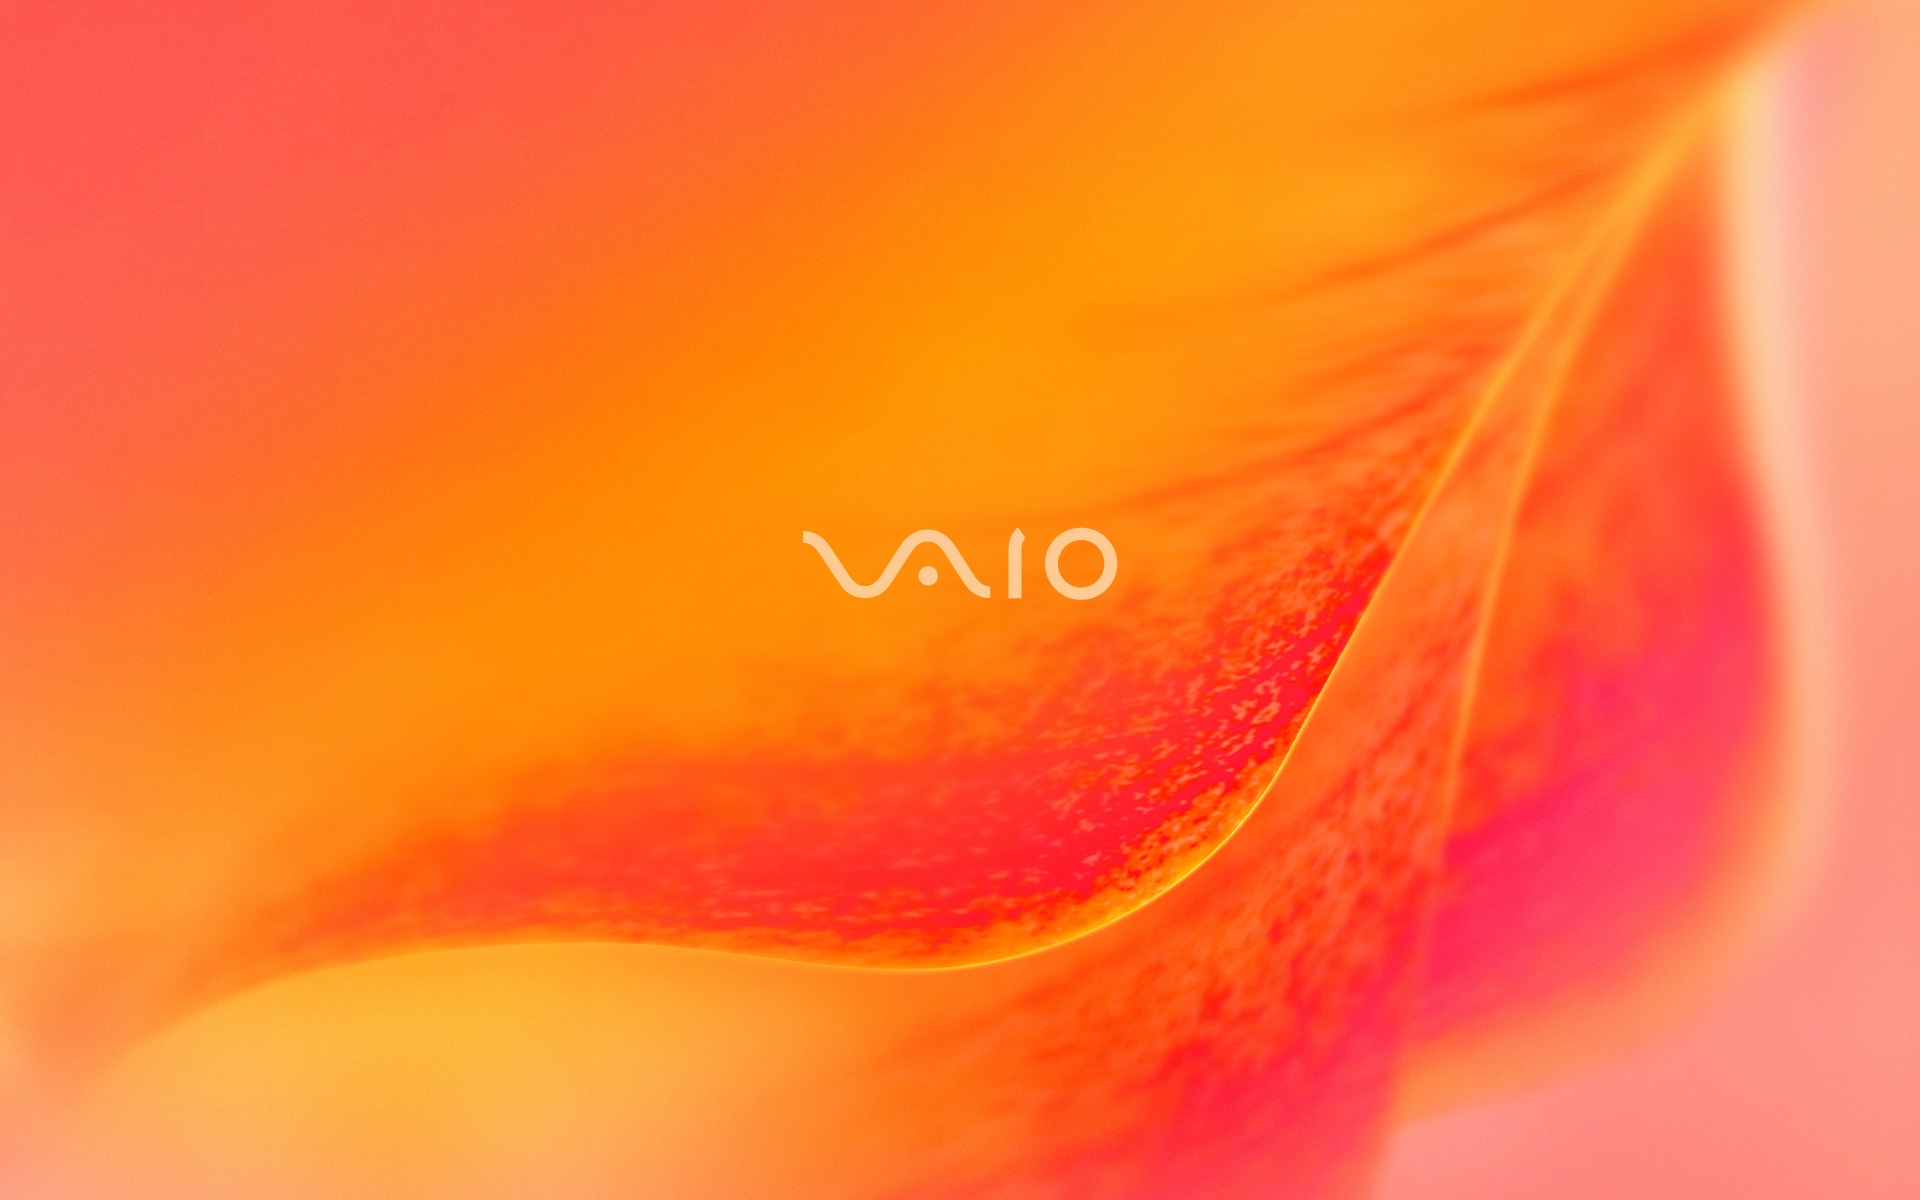 Vaio Orange Wallpaper Sony Vaio Computers Wallpapers In Jpg Format For Free Download